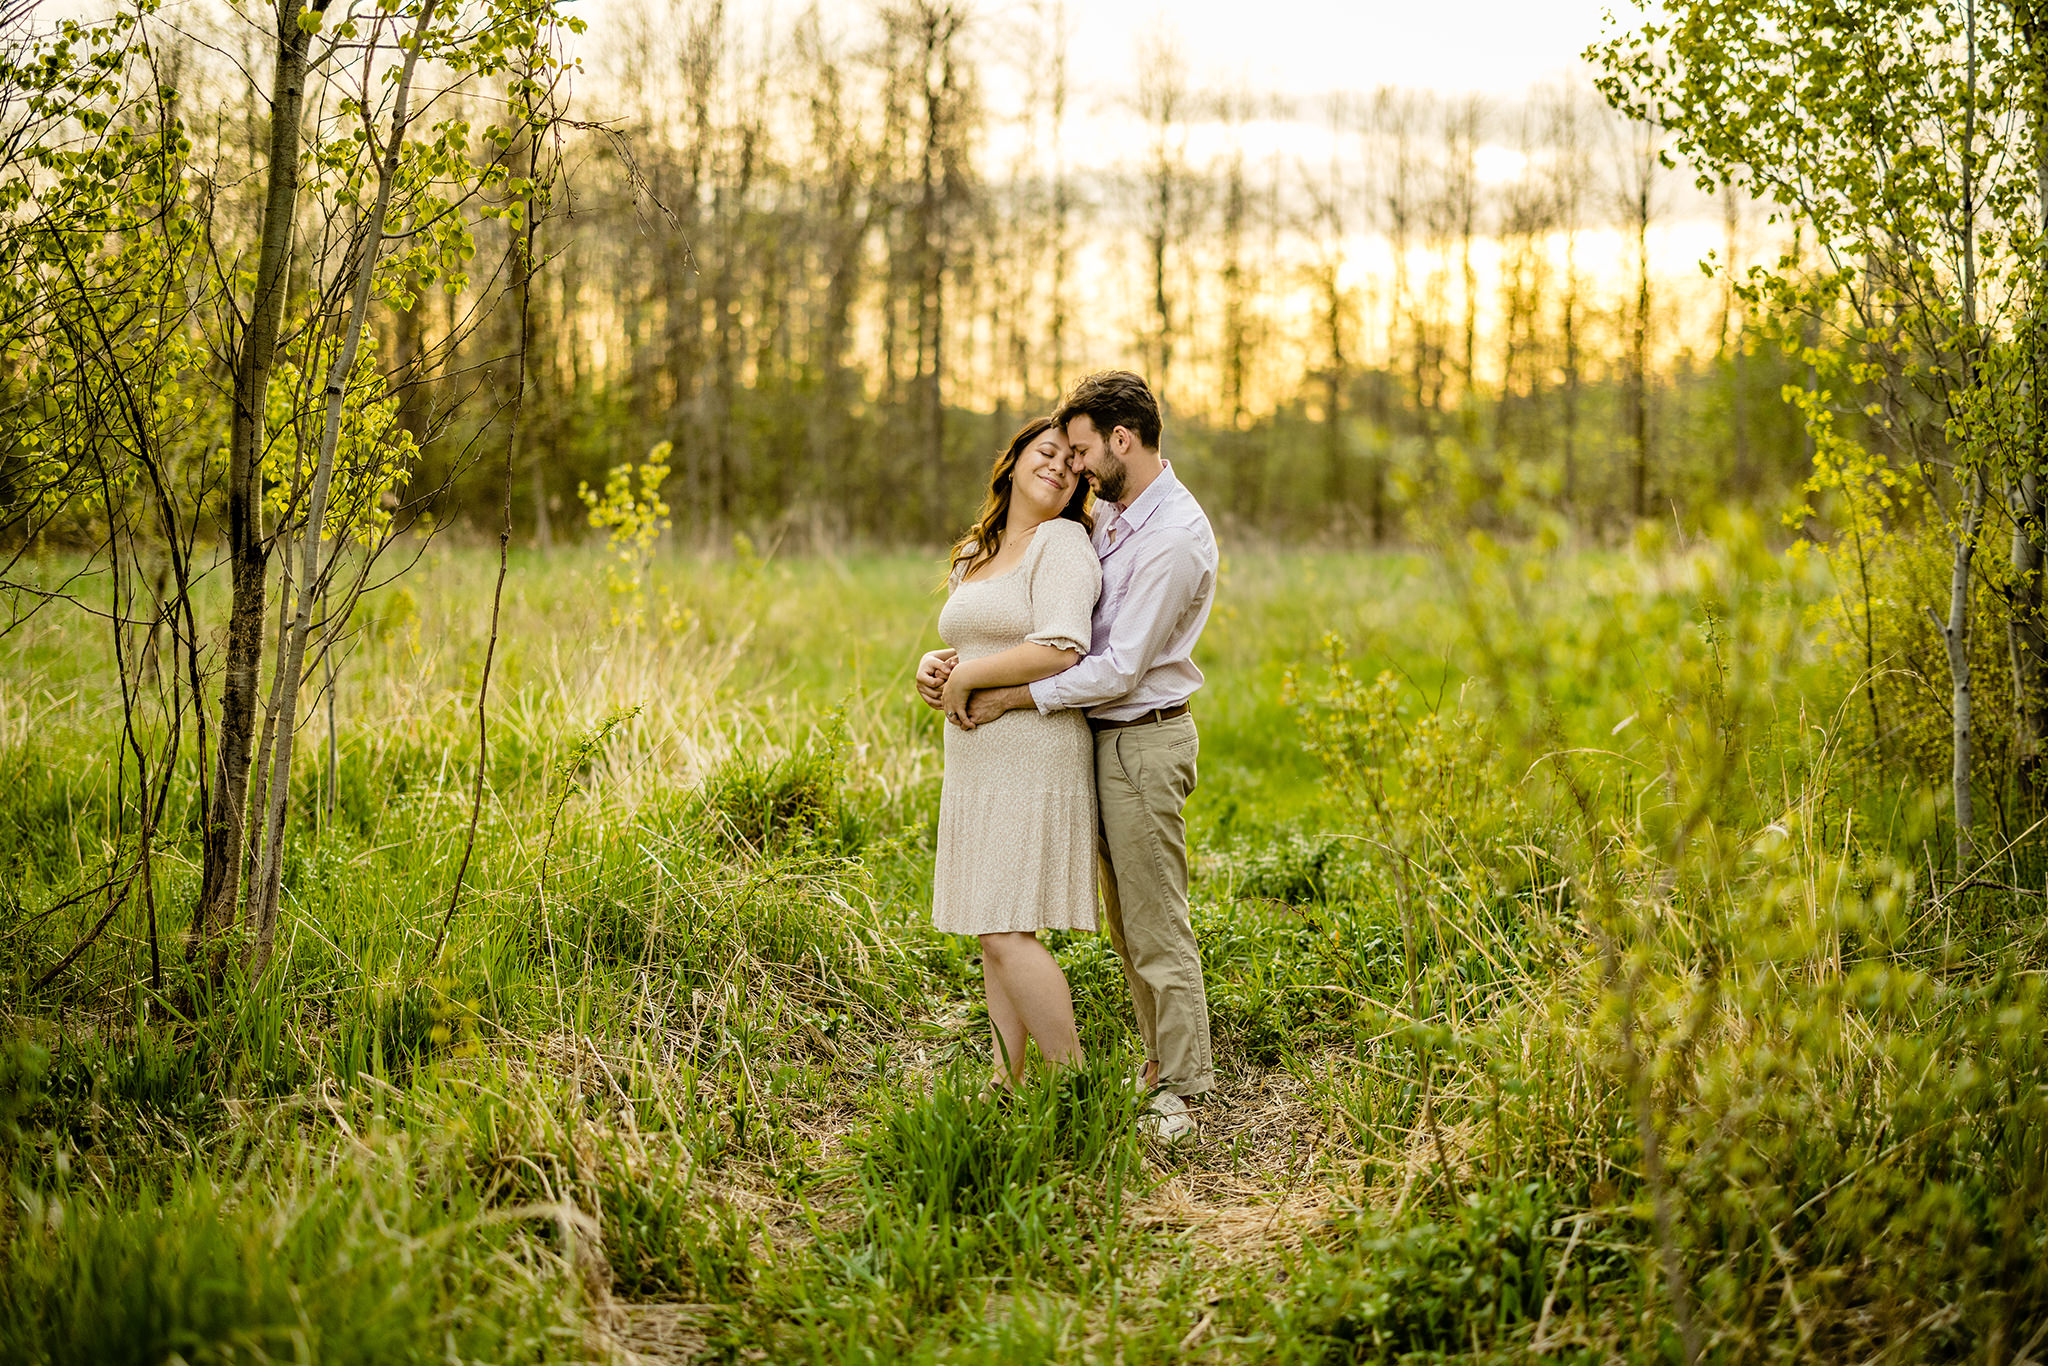 Man hugs his fiancee from behind as she smiles back at him in a green field by a forest.